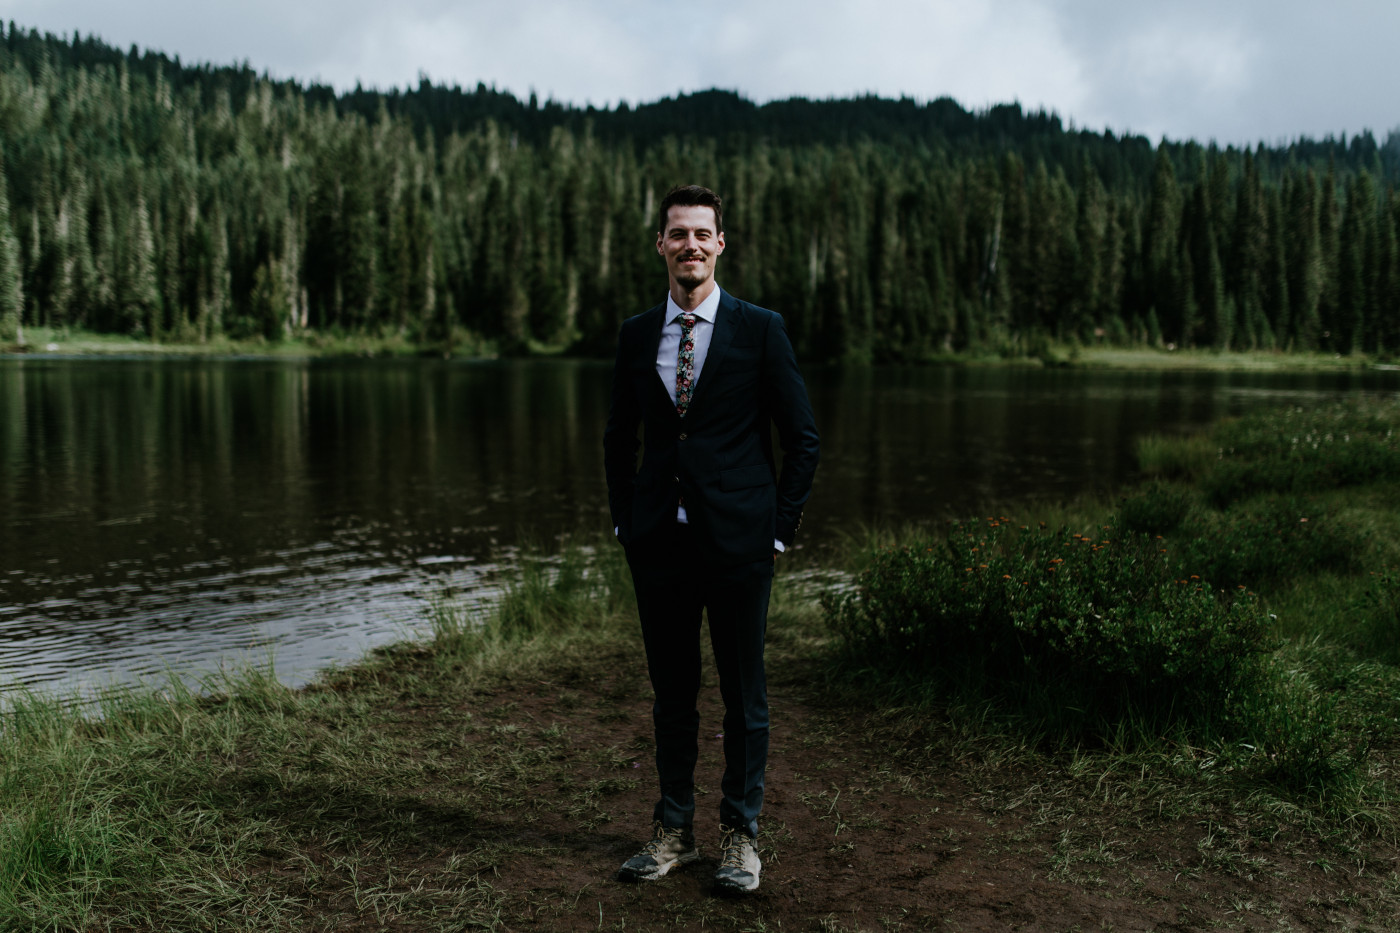 Chad stands near the lake. Elopement photography at Mount Rainier by Sienna Plus Josh.